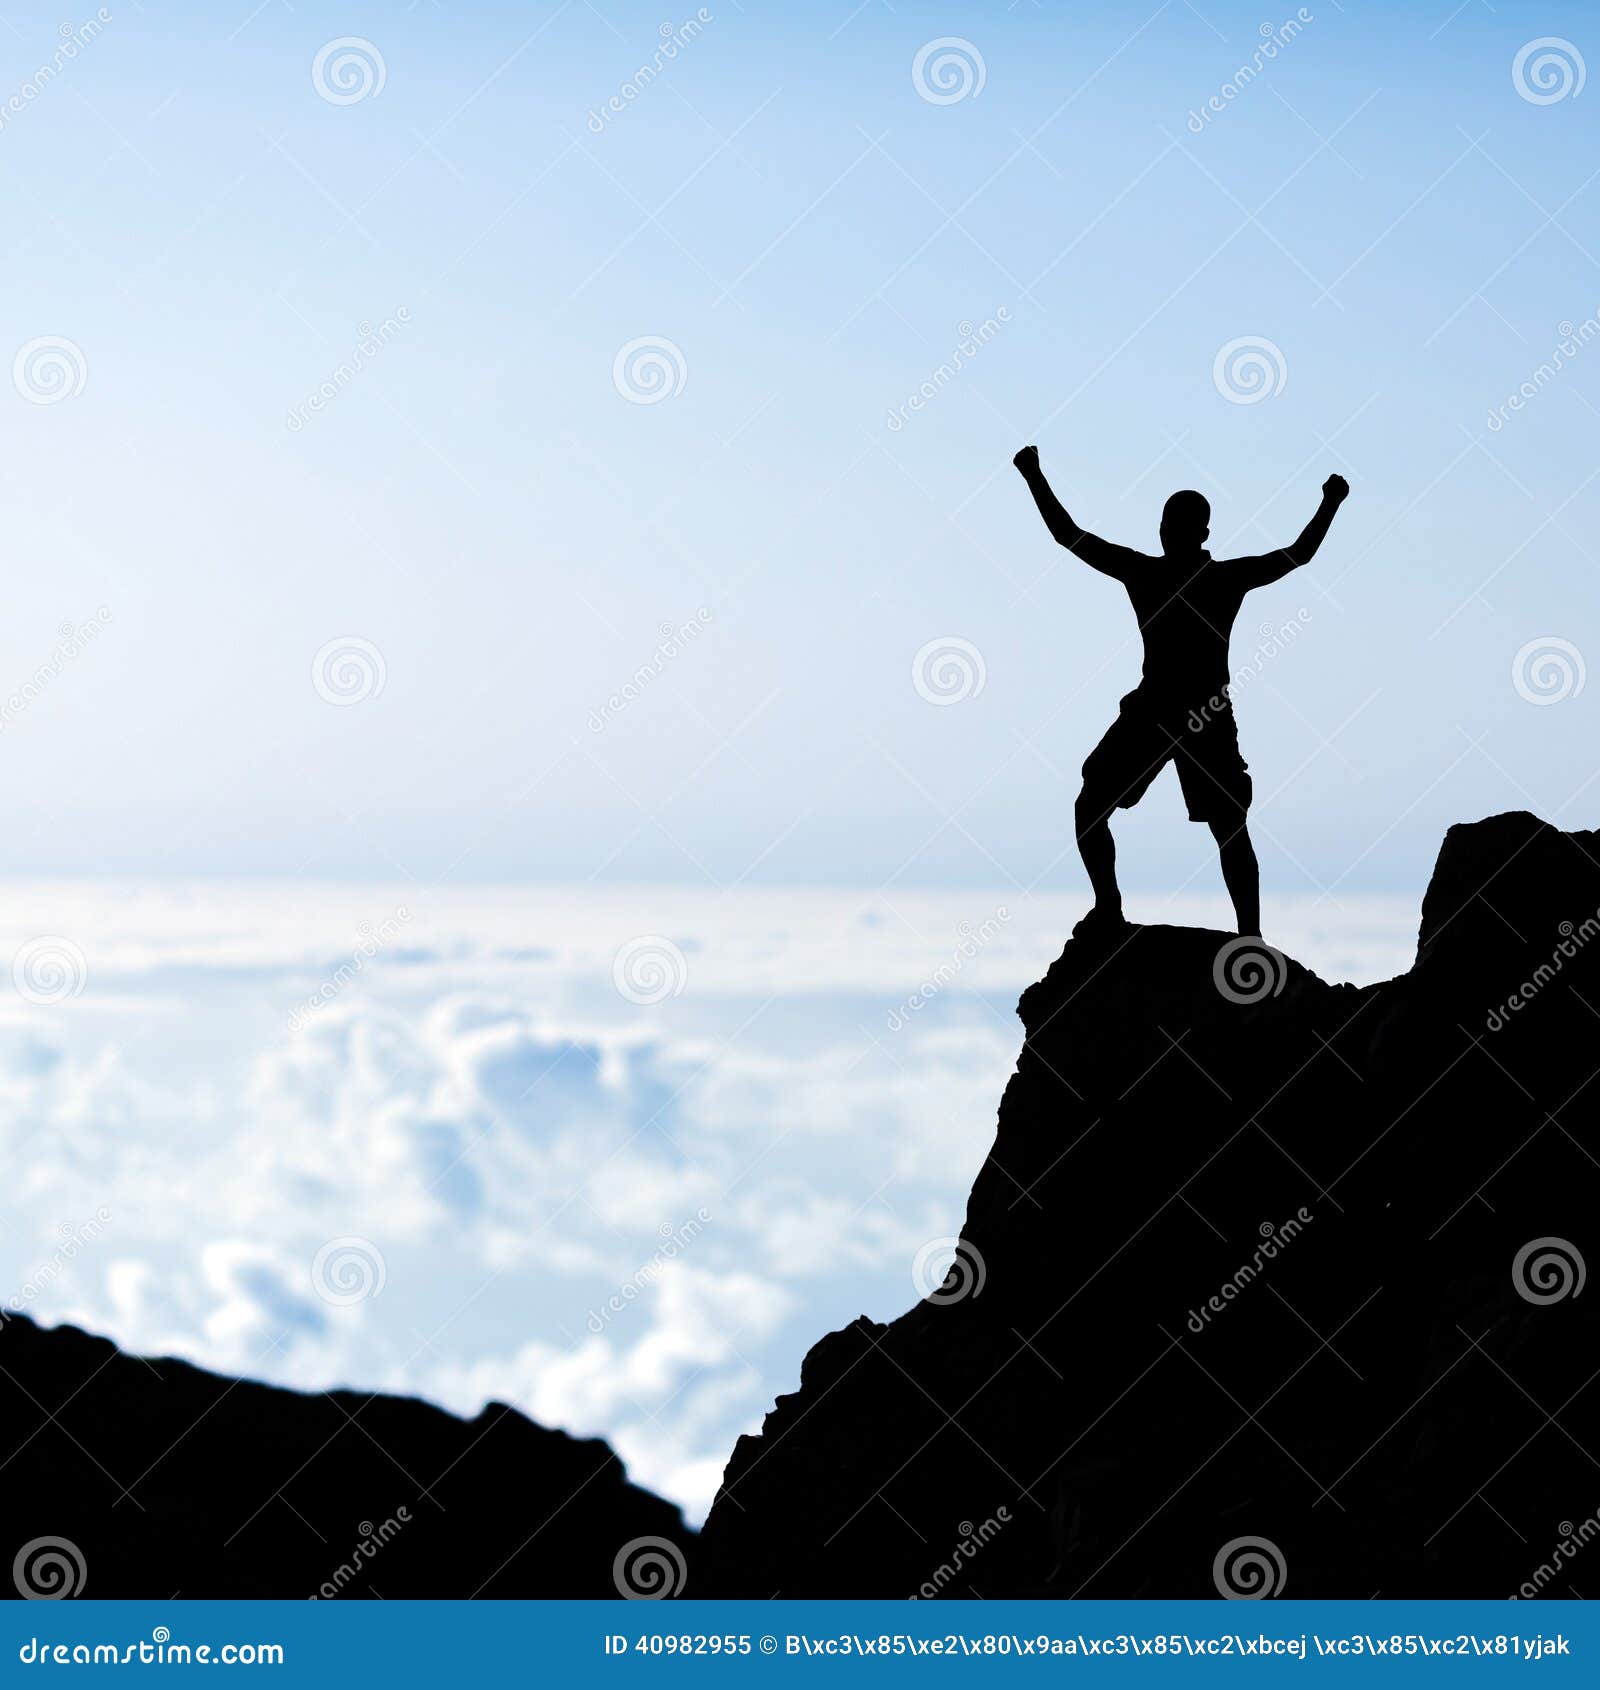 Success Man Silhouette, Climbing In Mountains Stock Photo ...